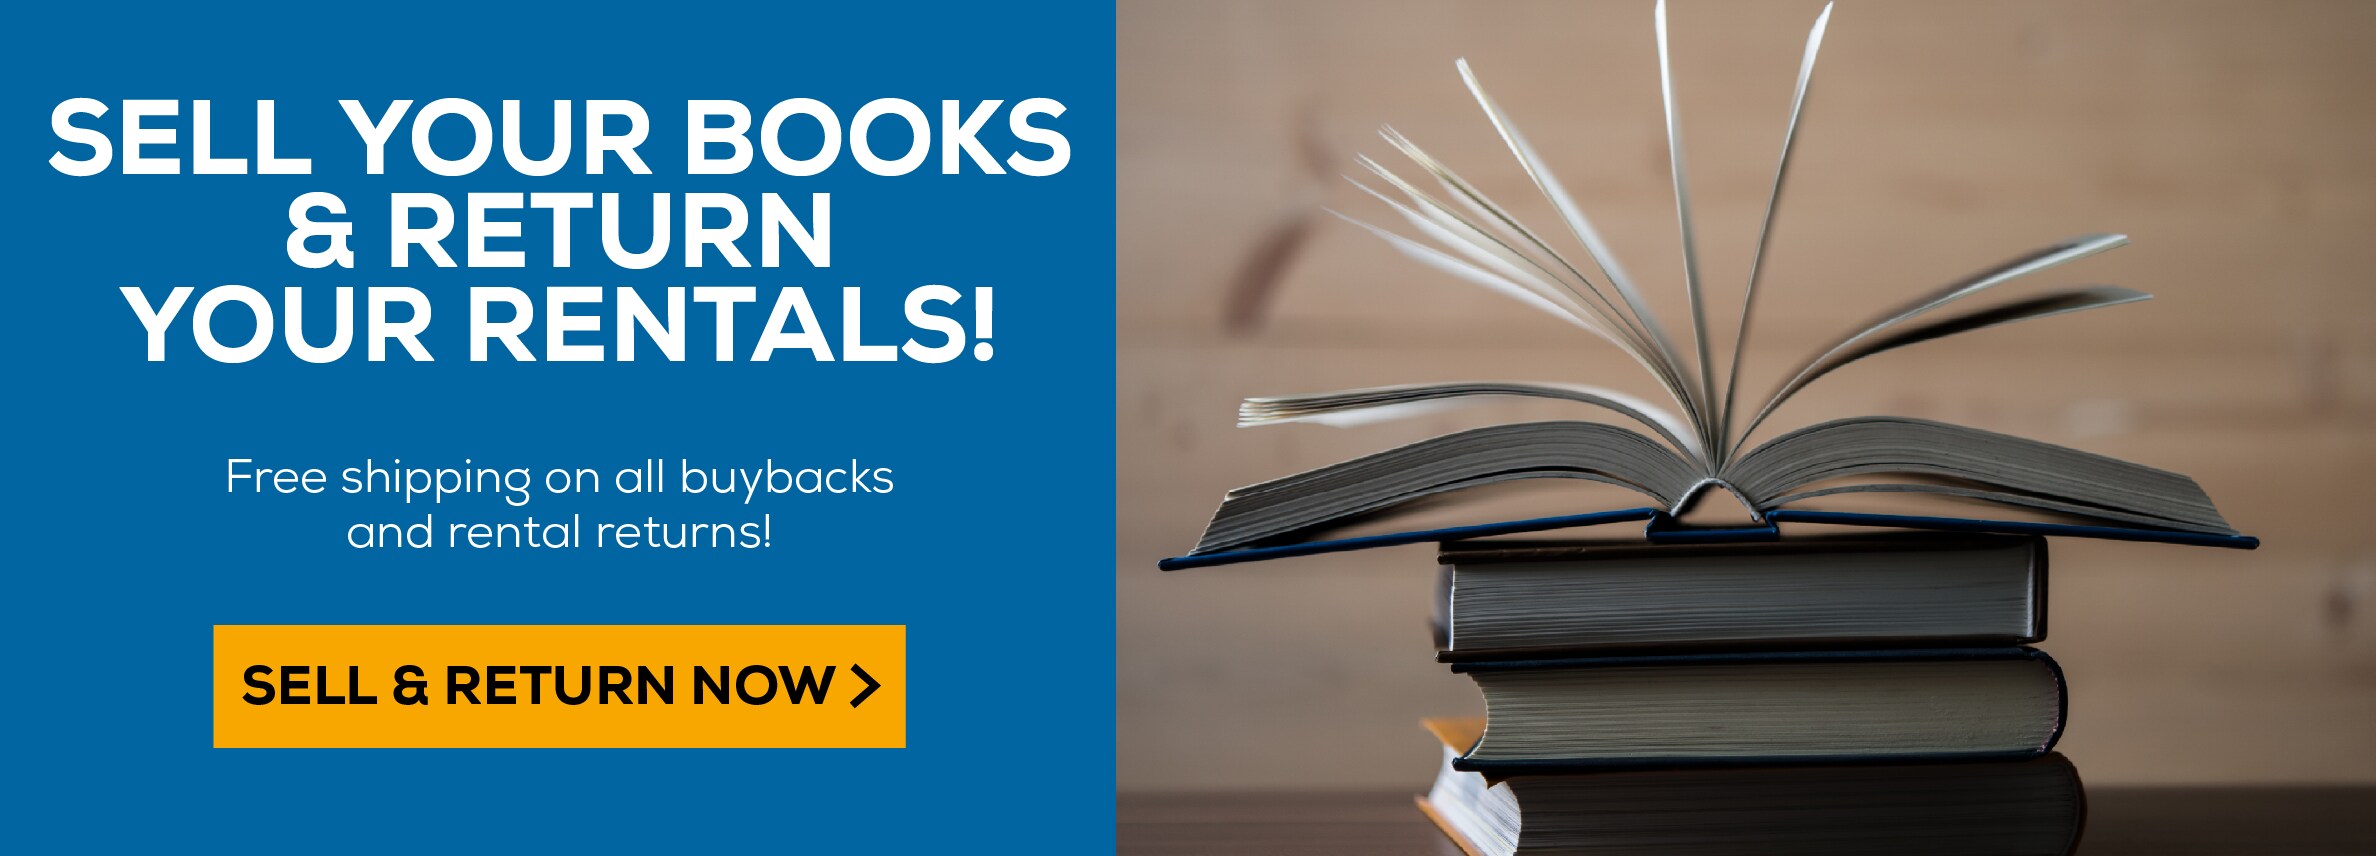 Sell your books and retrun your reantals! Free shipping on all buybacks and rental retruns! Sell and Retrun now